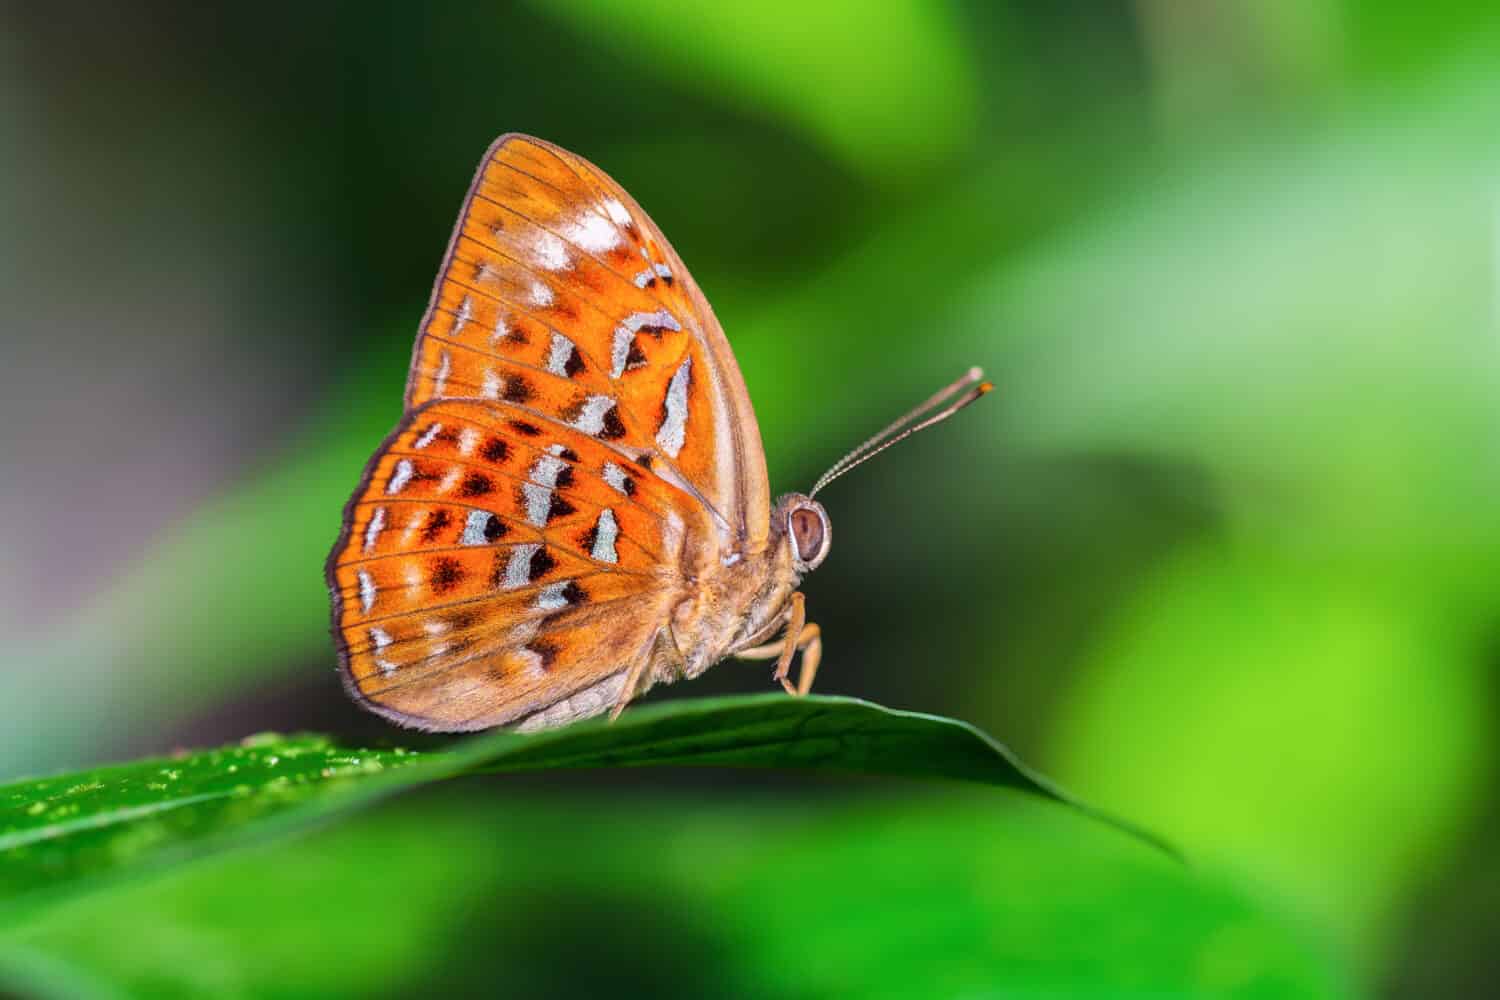 Larger Harlequin or Taxila haquinus berthae Fruhstorfer(1904) beautiful orange butterfly perching on green leaves with blur background, Thung saleang luang National Park, Thailand.